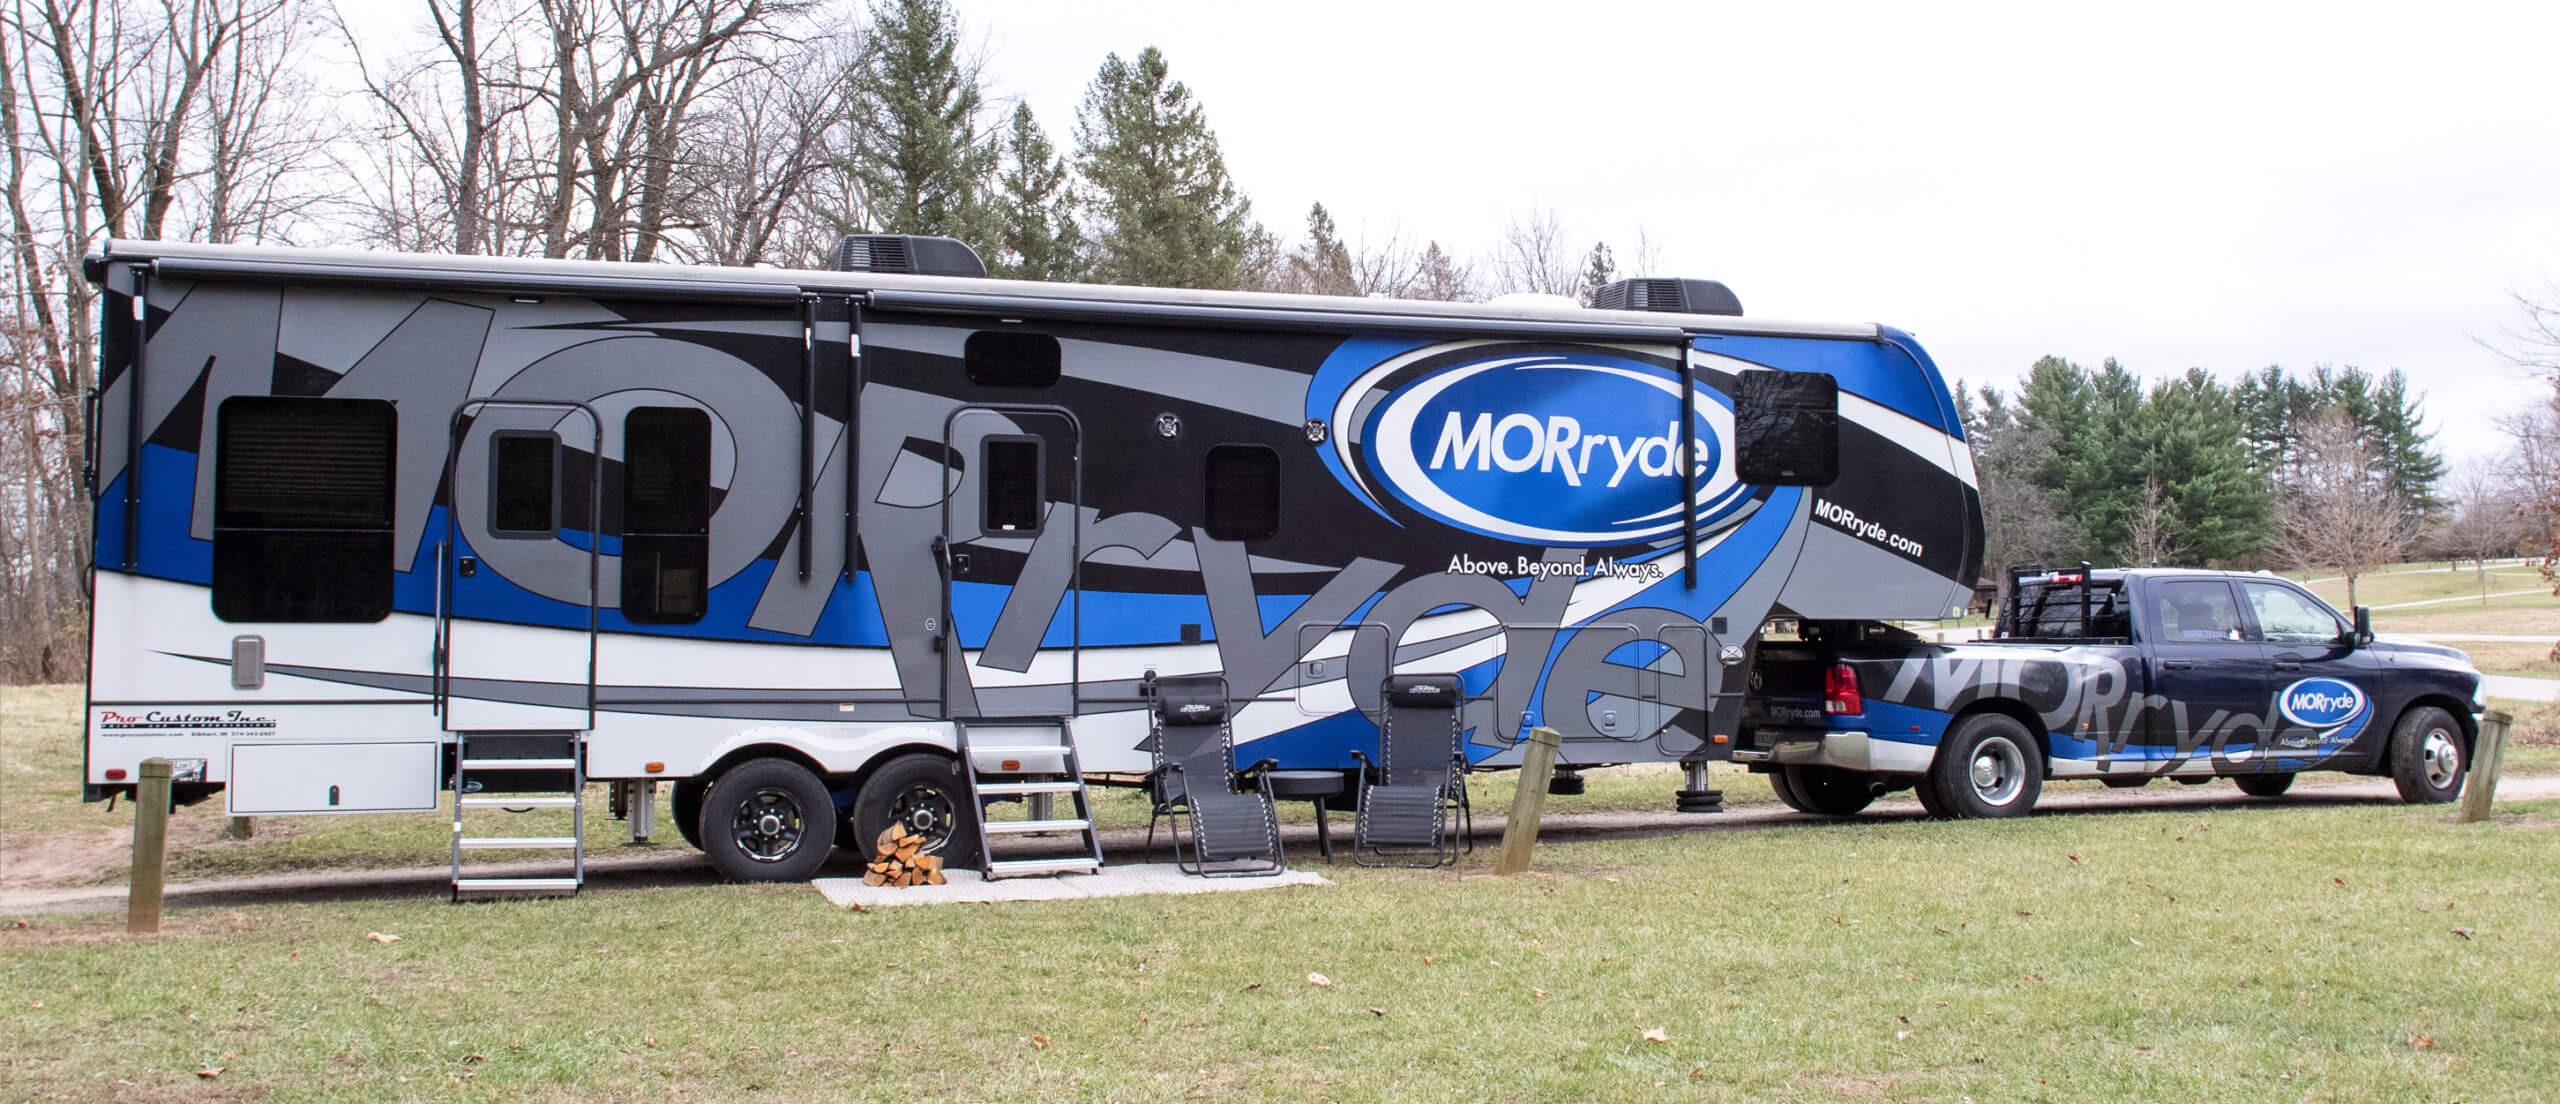 Rv Upgrades On The Morryde 5th Wheel